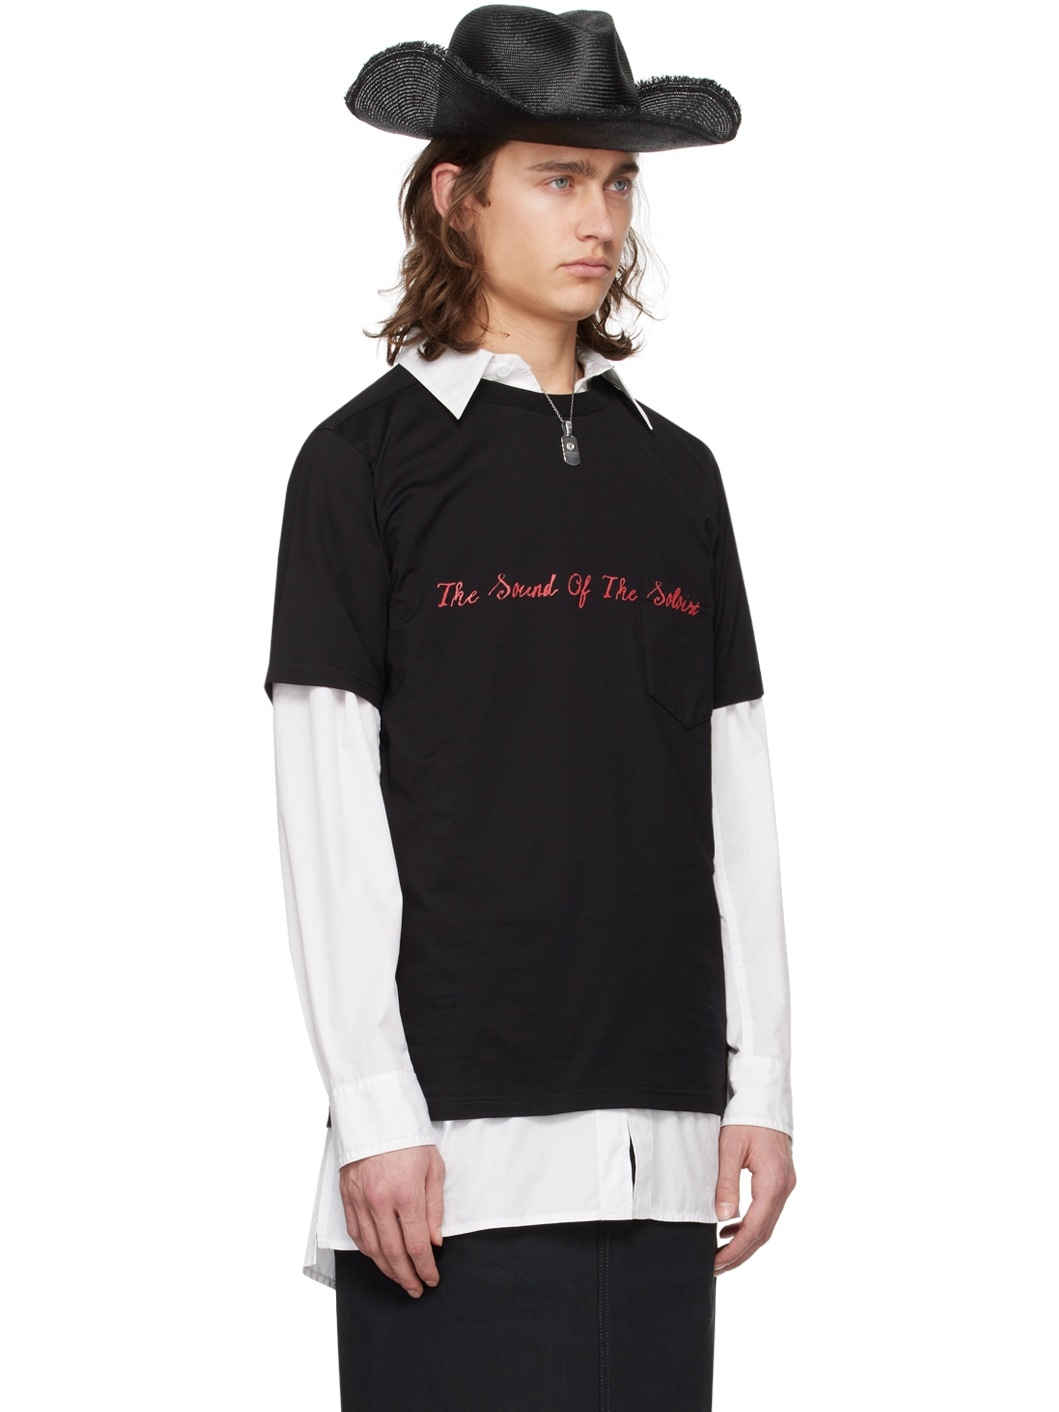 Black 'The Sound Of The Soloist' T-Shirt - 2